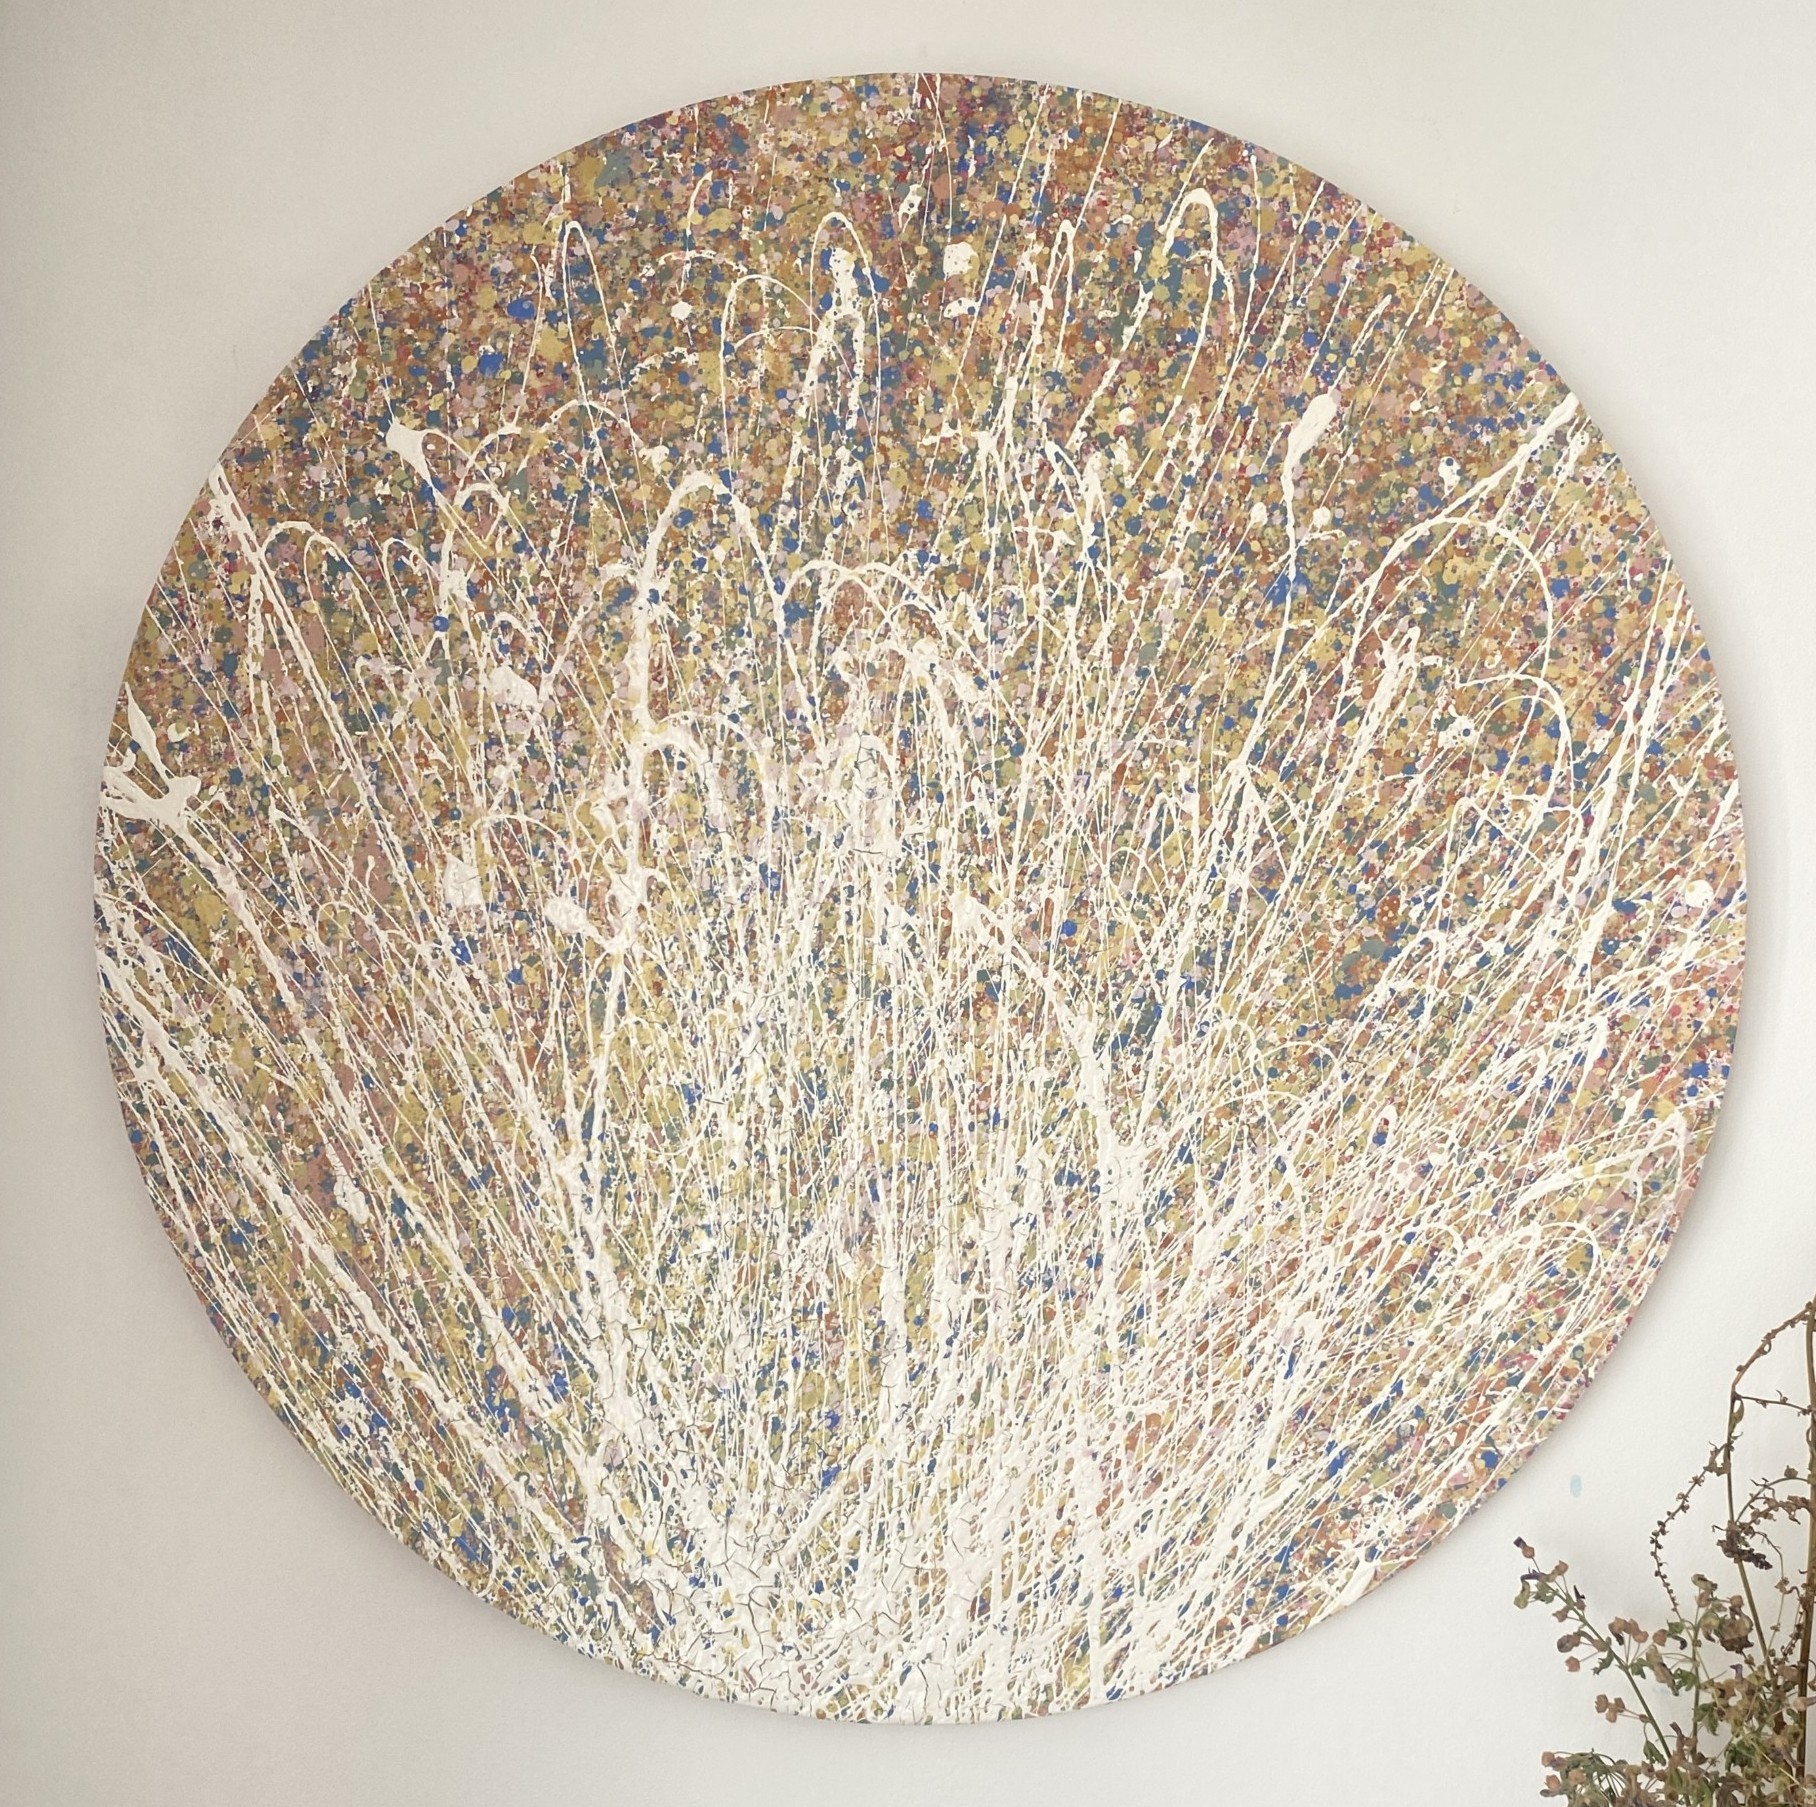 a gallery view of early autumn in somerset by somerset artist emily dduchscherer kirkcreated with environmentally friendly, water based paints which show hints of a glossy sheen this circular artwork is finished a satin varnish that gives a three dimensional affect this round textured abstract painting is made on a cotton canvas measuring 60 centimetres in diameter which is approximately 24 Inches Early Autumn in Somerset was completed in my home studio located in South Somerset September 2021